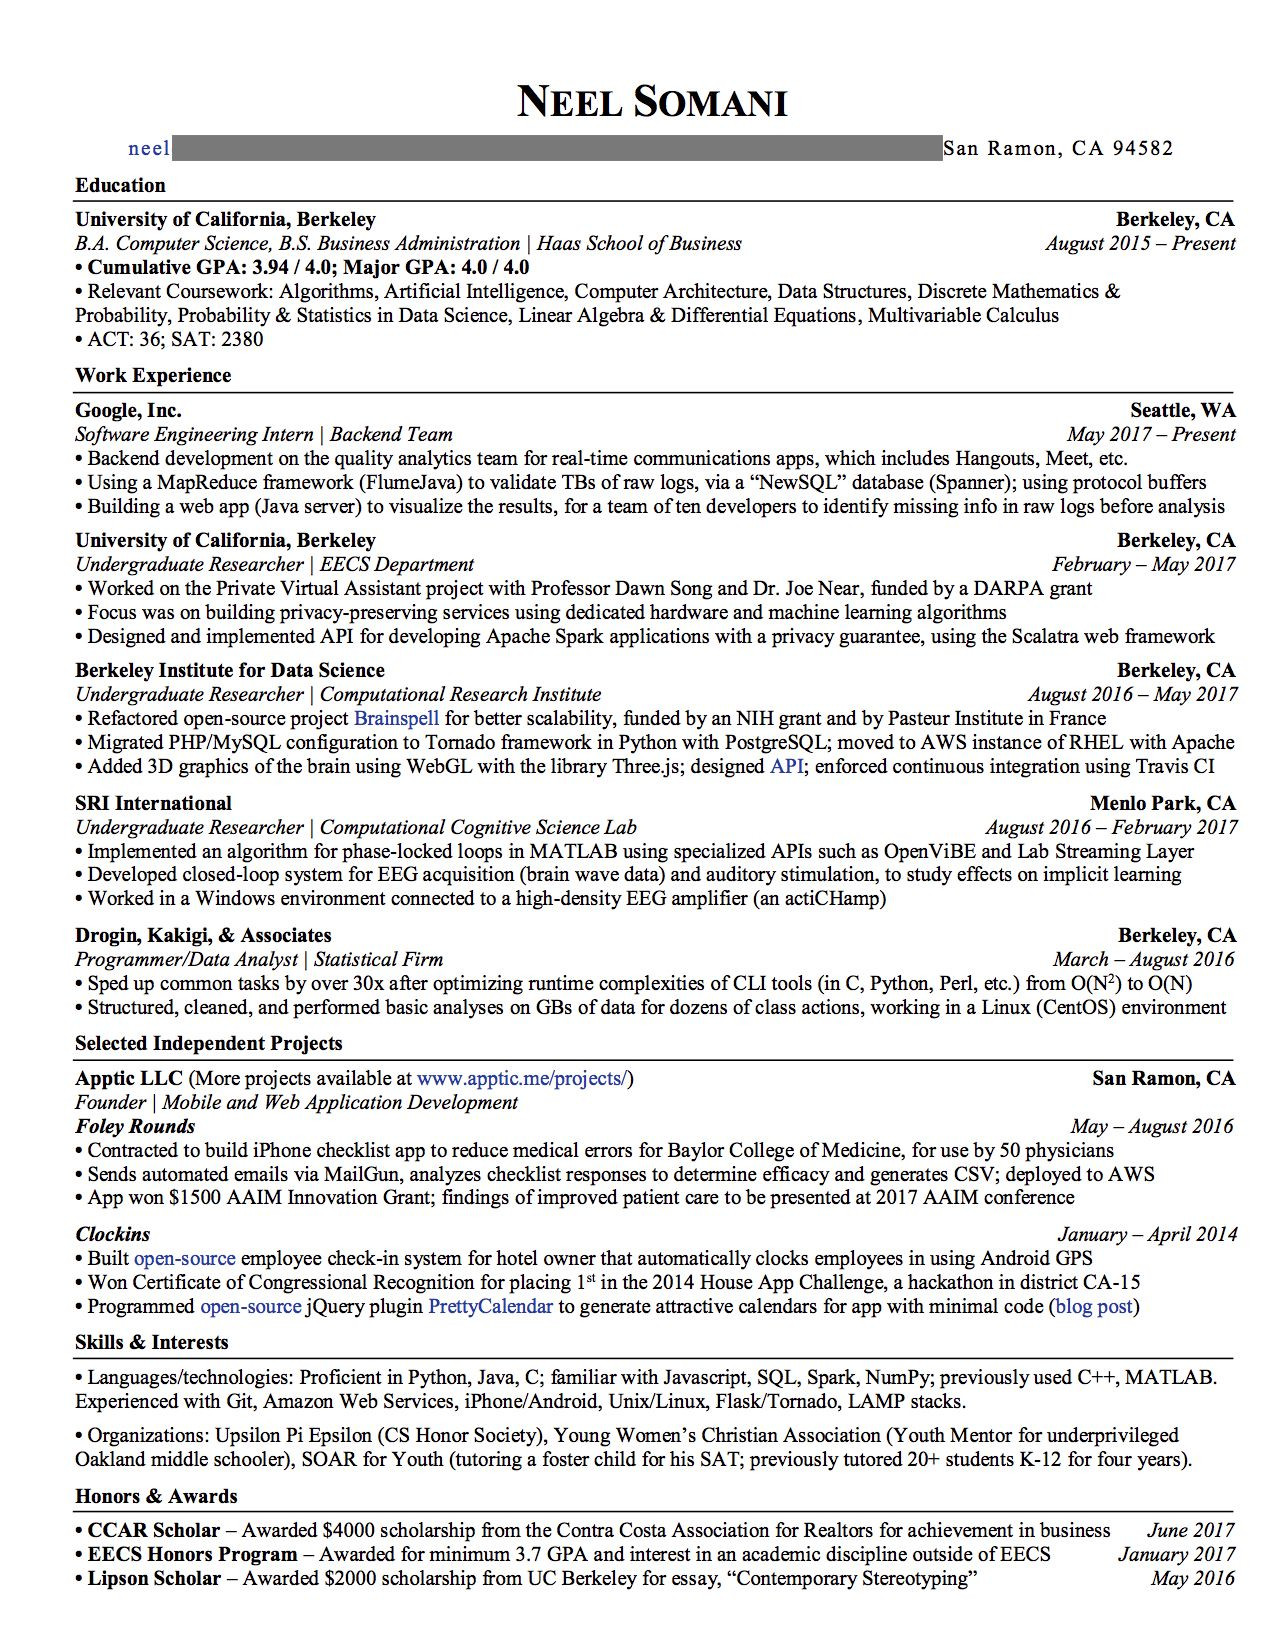 Sample Resume for Uc Berkeley Students This Resume Got Me Internship Offers From Google, Nsa & More …